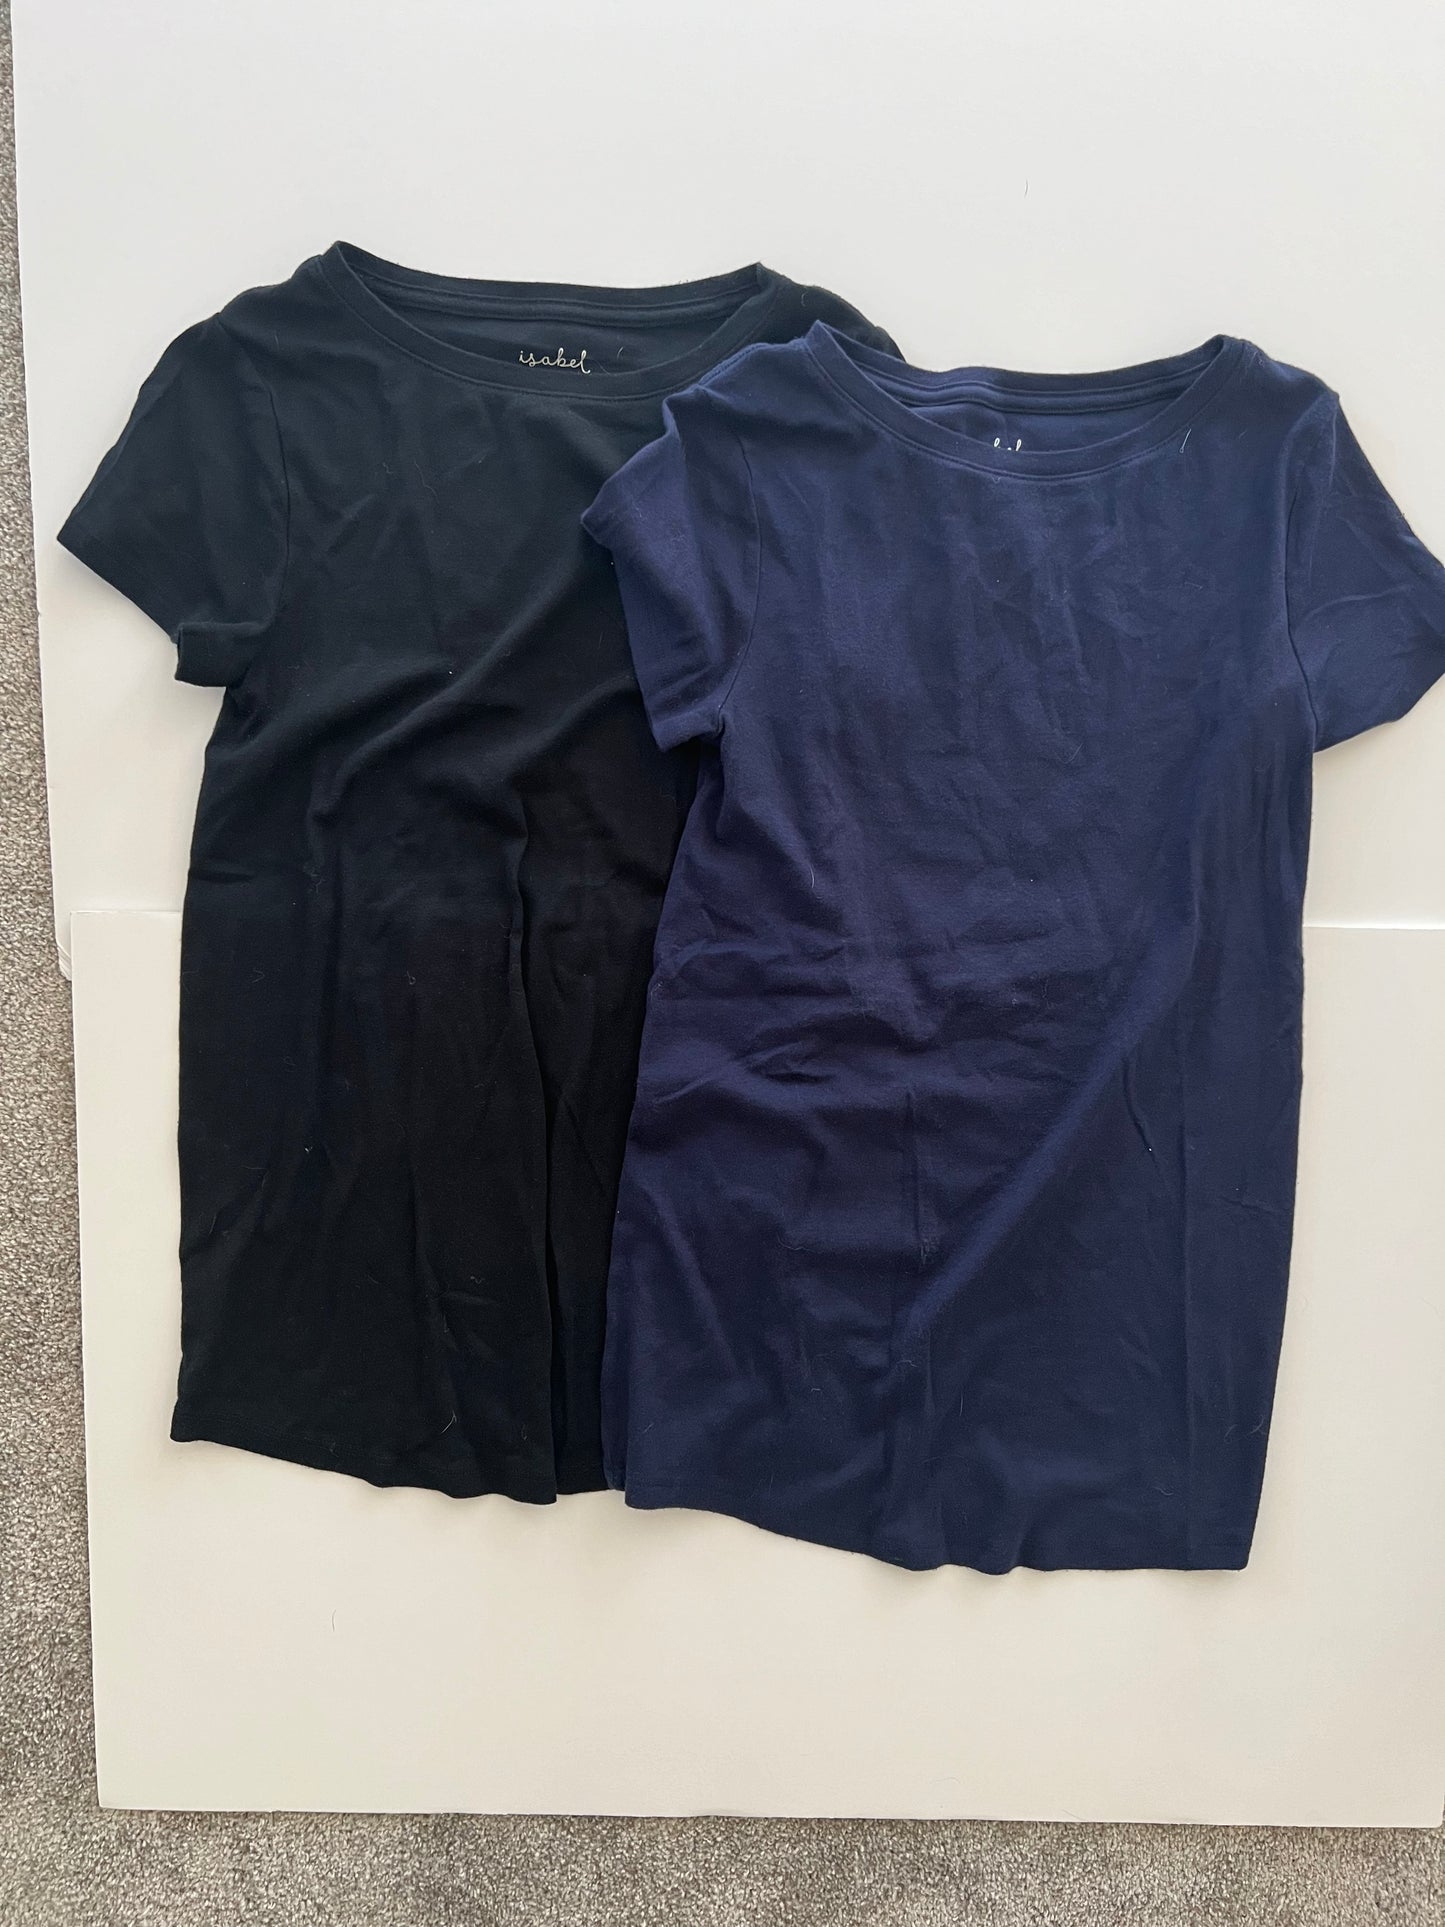 Isabel Maternity Navy and Black Shirts Size S